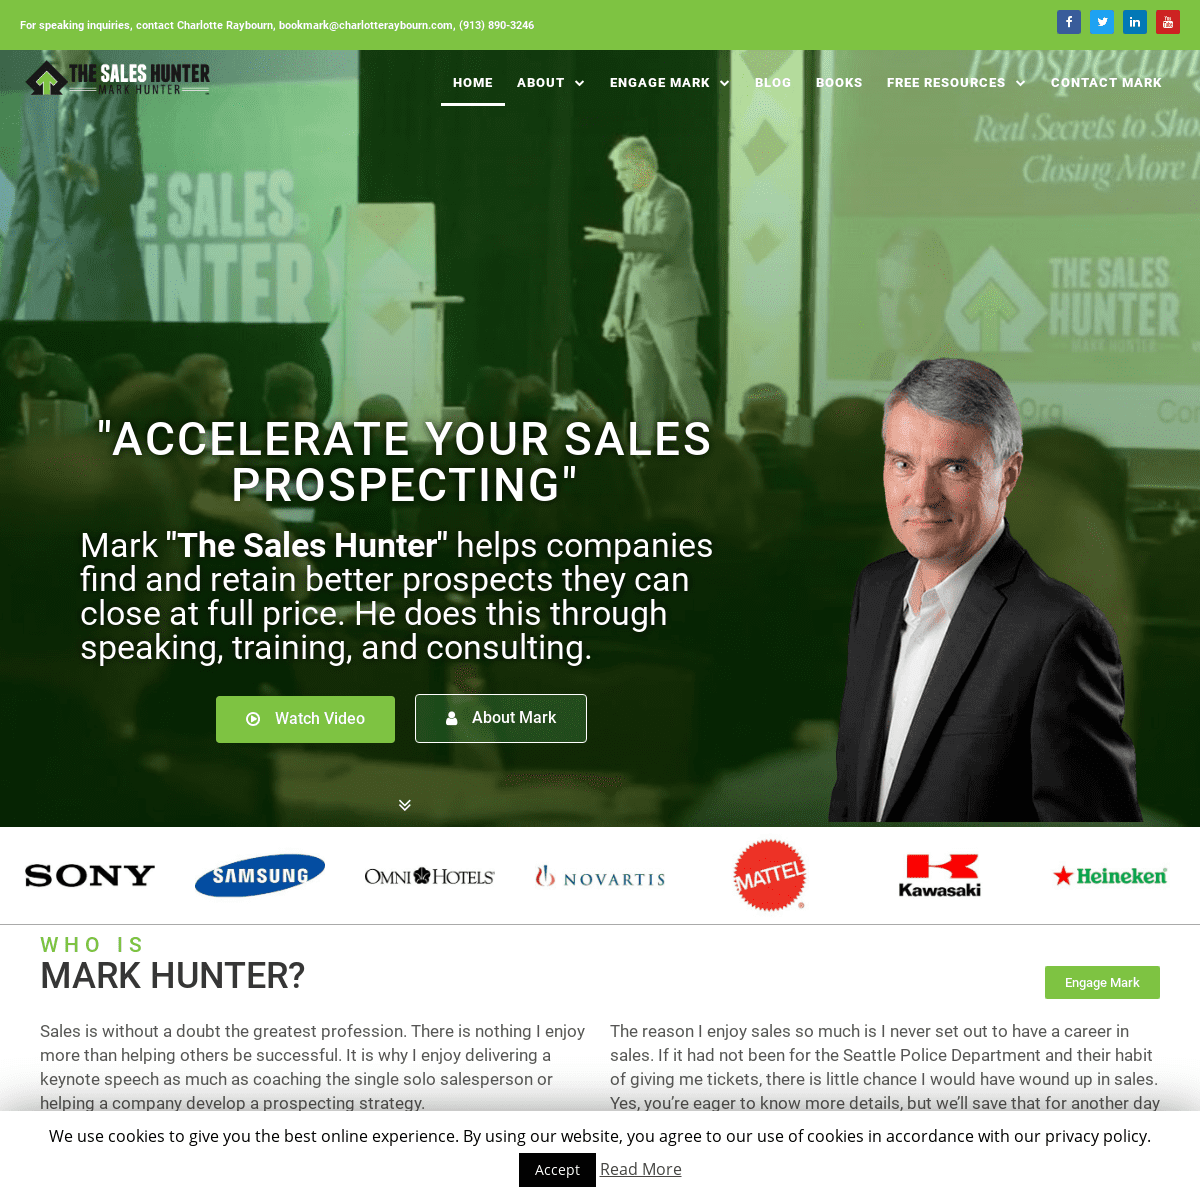 Mark Hunter | ACCELERATE YOUR SALES PROSPECTING